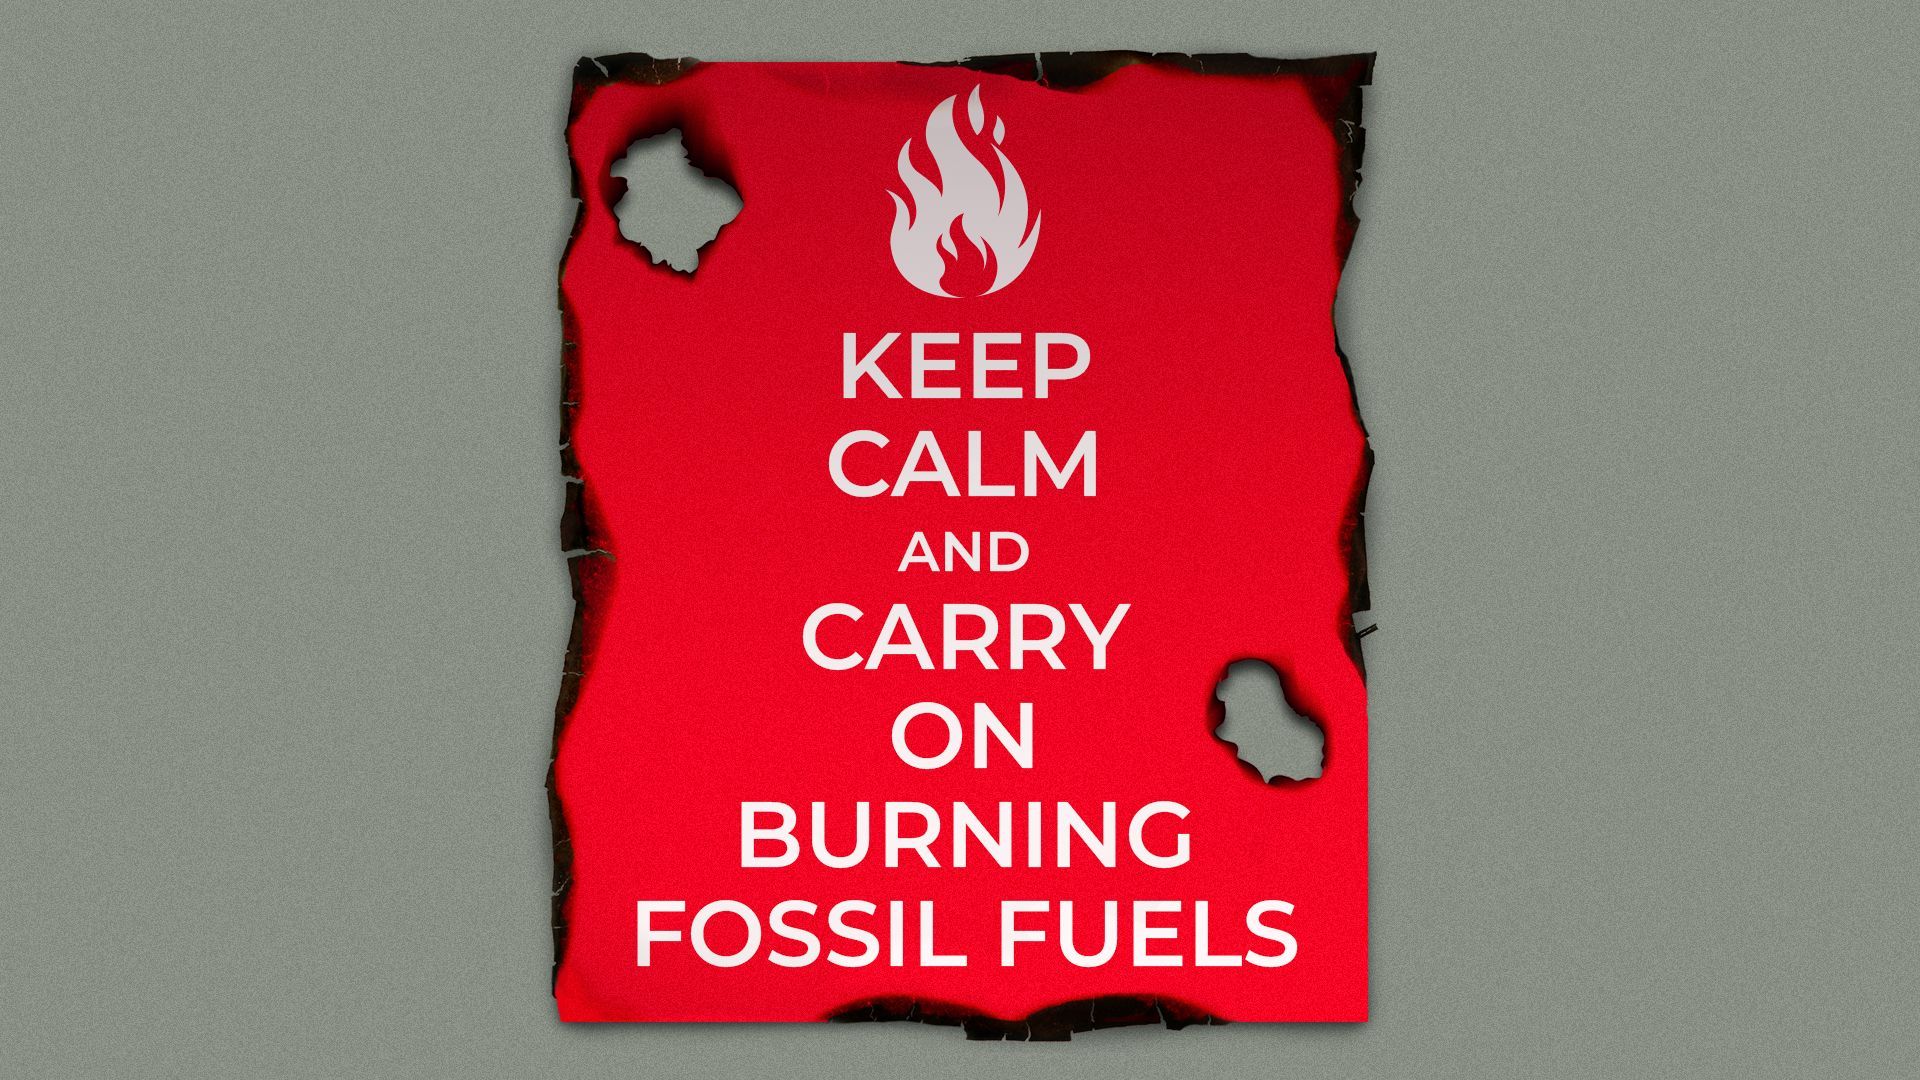 Illustration of a burnt poster with the words: "Keep Calm and Carry On Burning Fossil Fuels"